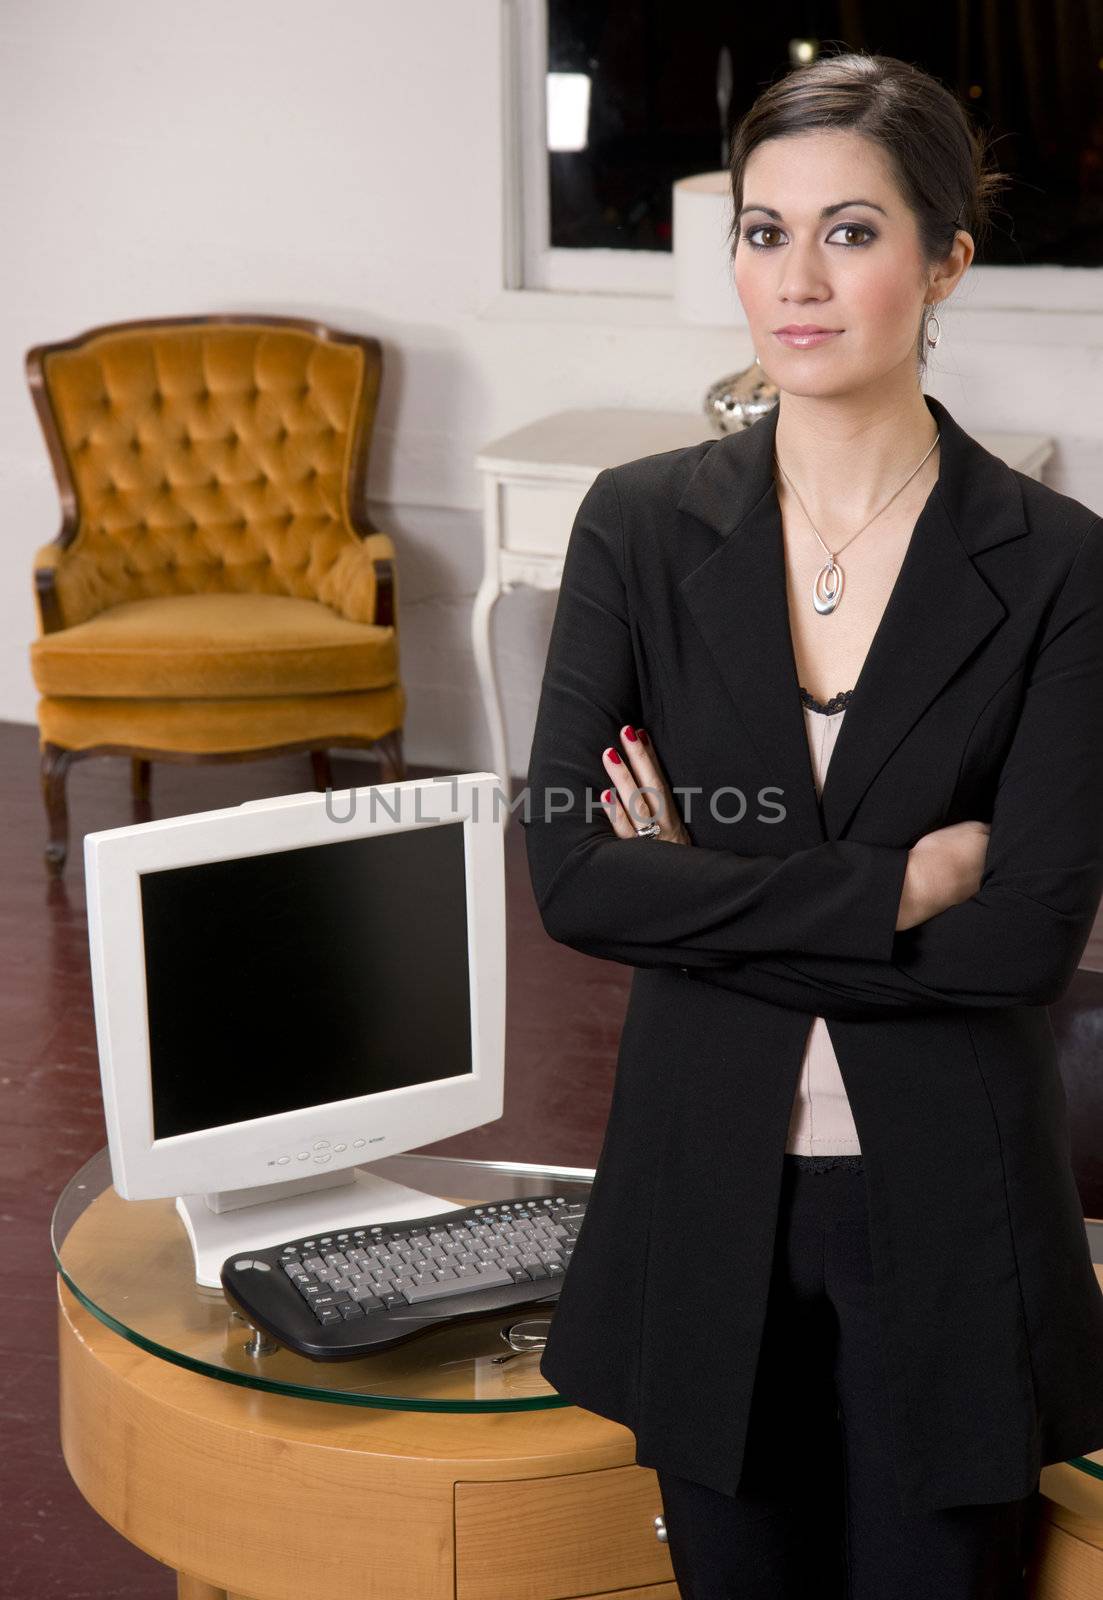 A Business Woman standing in front of her desk